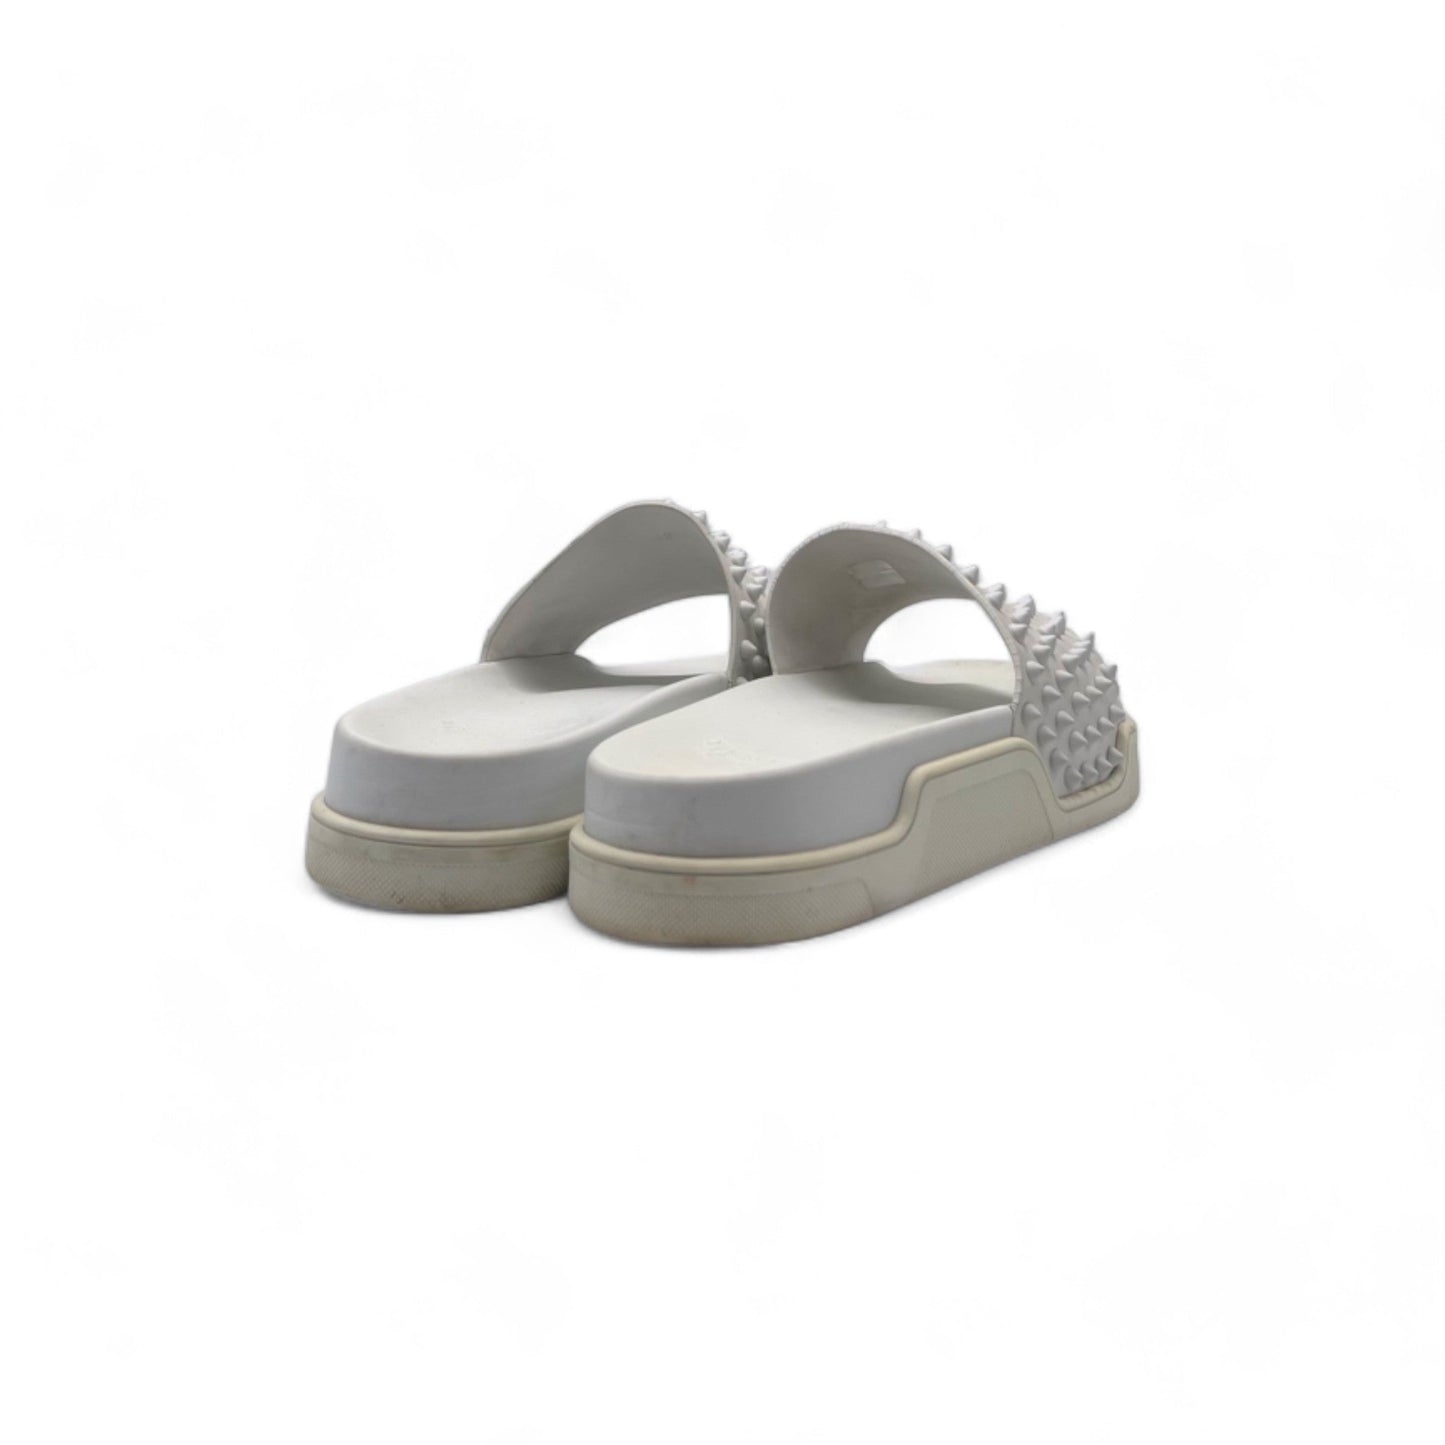 Christian Louboutin Spike Accents Rubber Slides